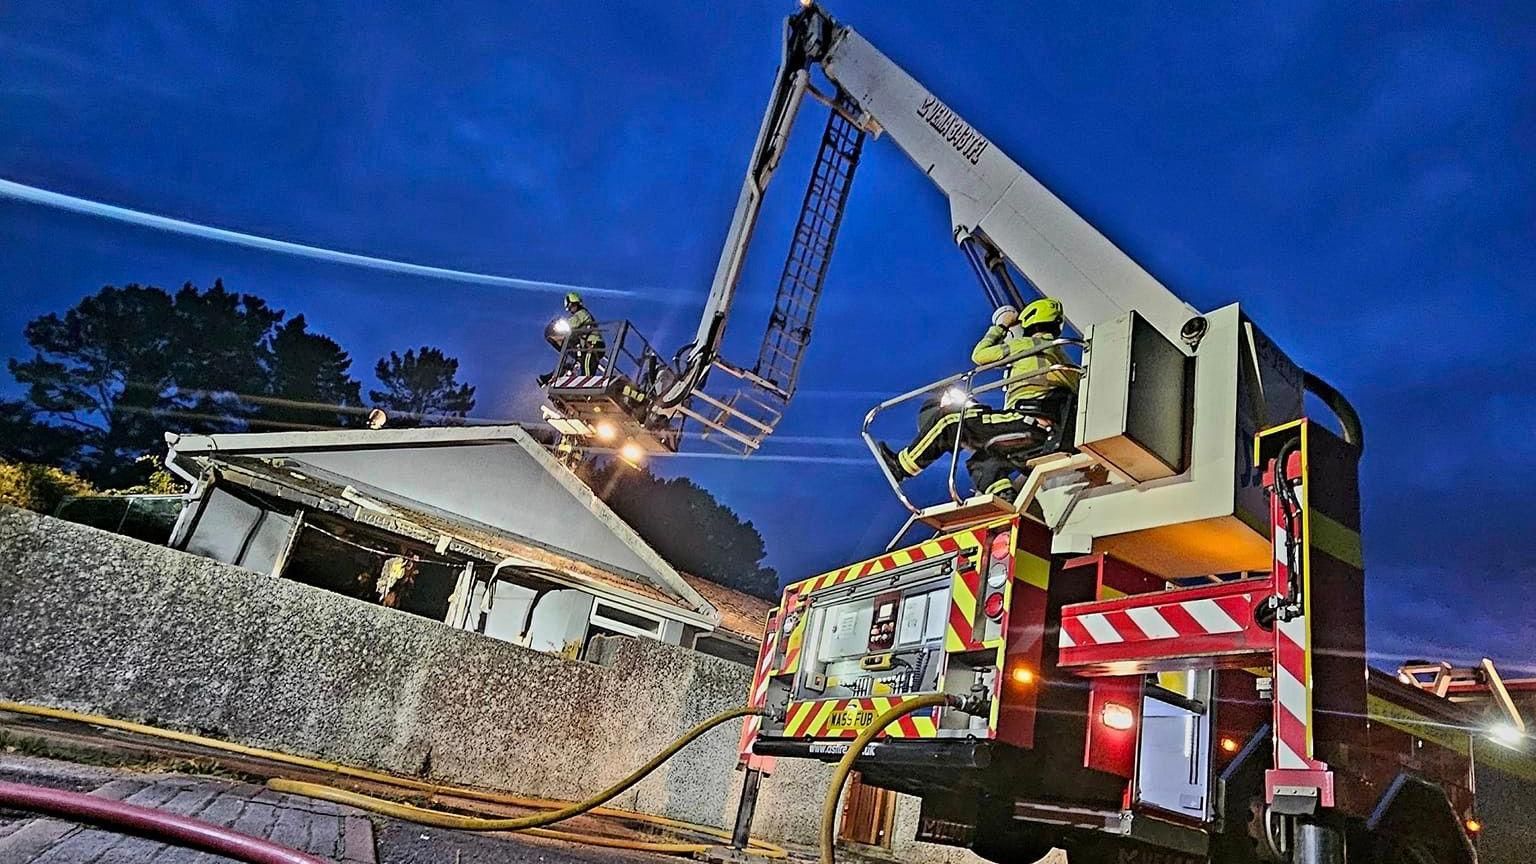 An aerial ladder platform carrying a firefighter who is helping tackle a blaze at a bungalow